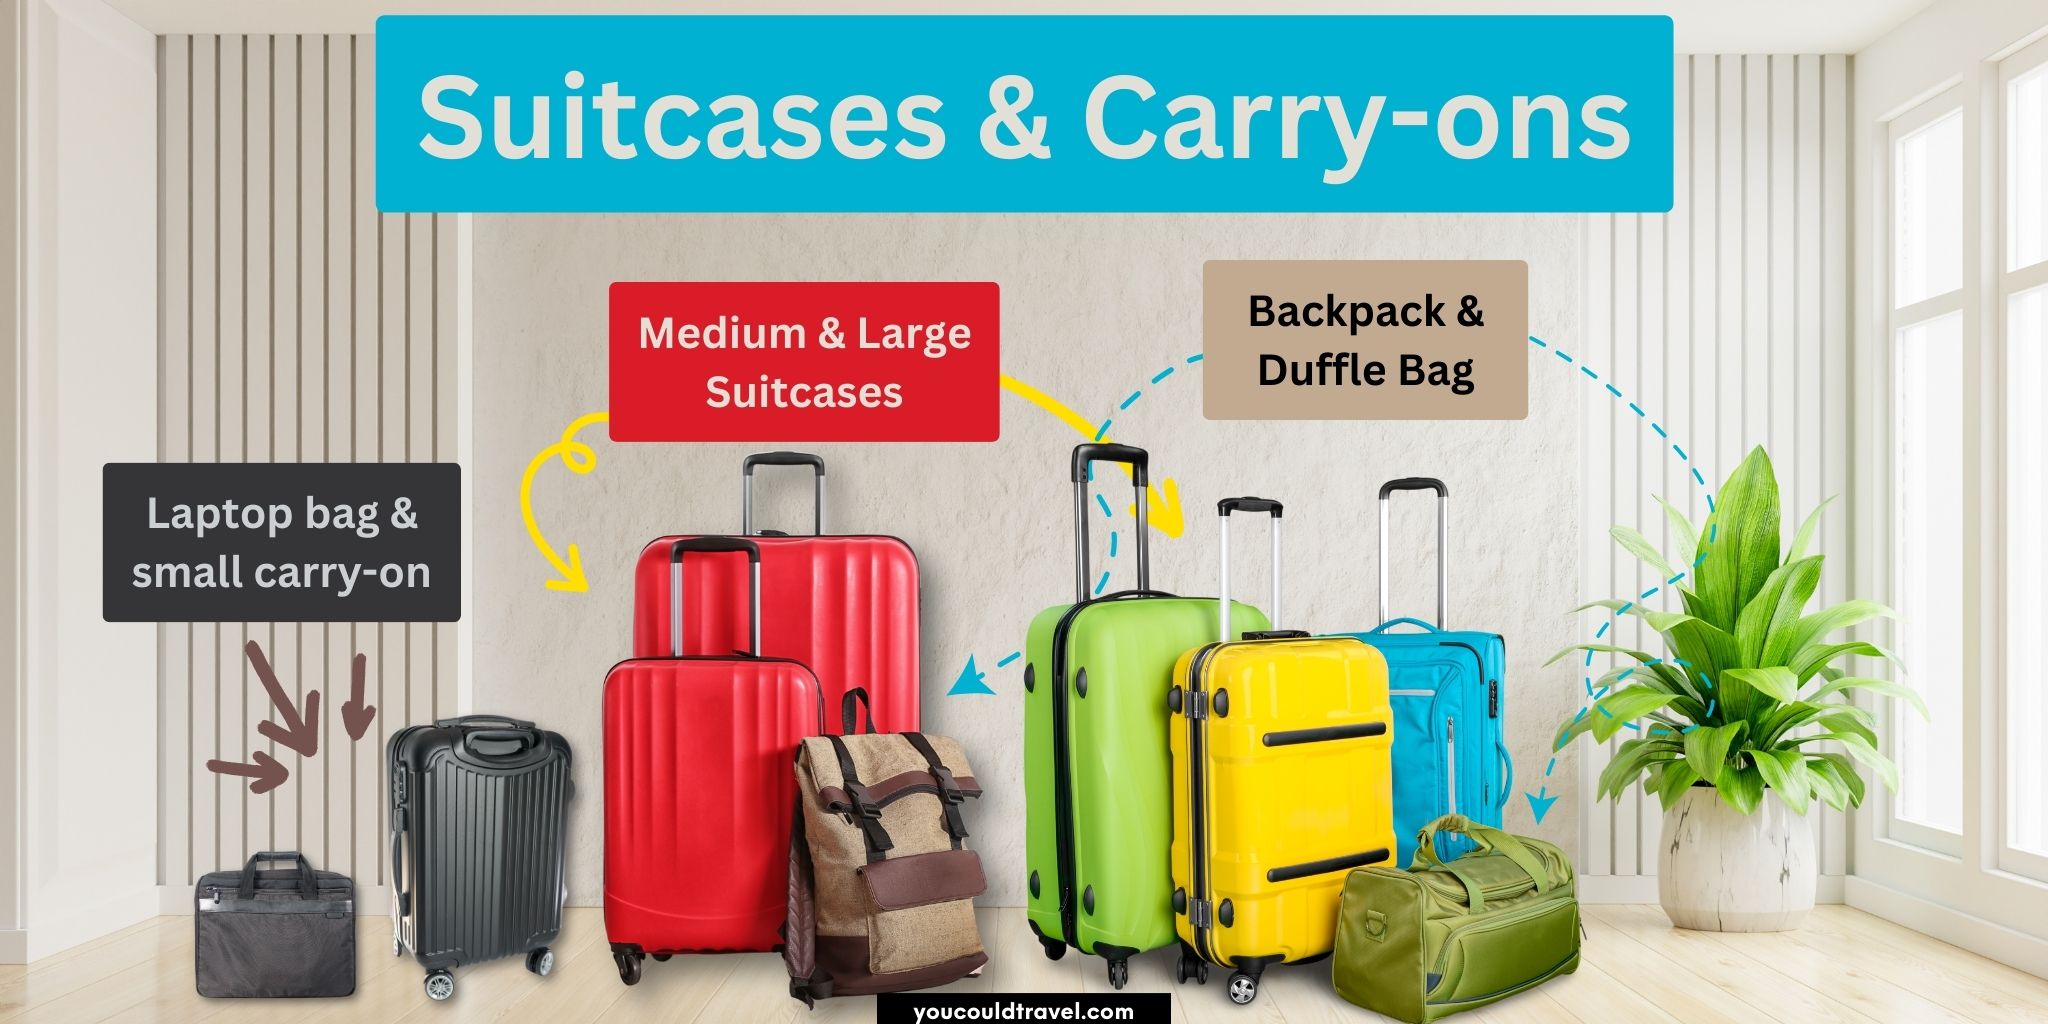 Suitcases and carry-on size comparison and examples